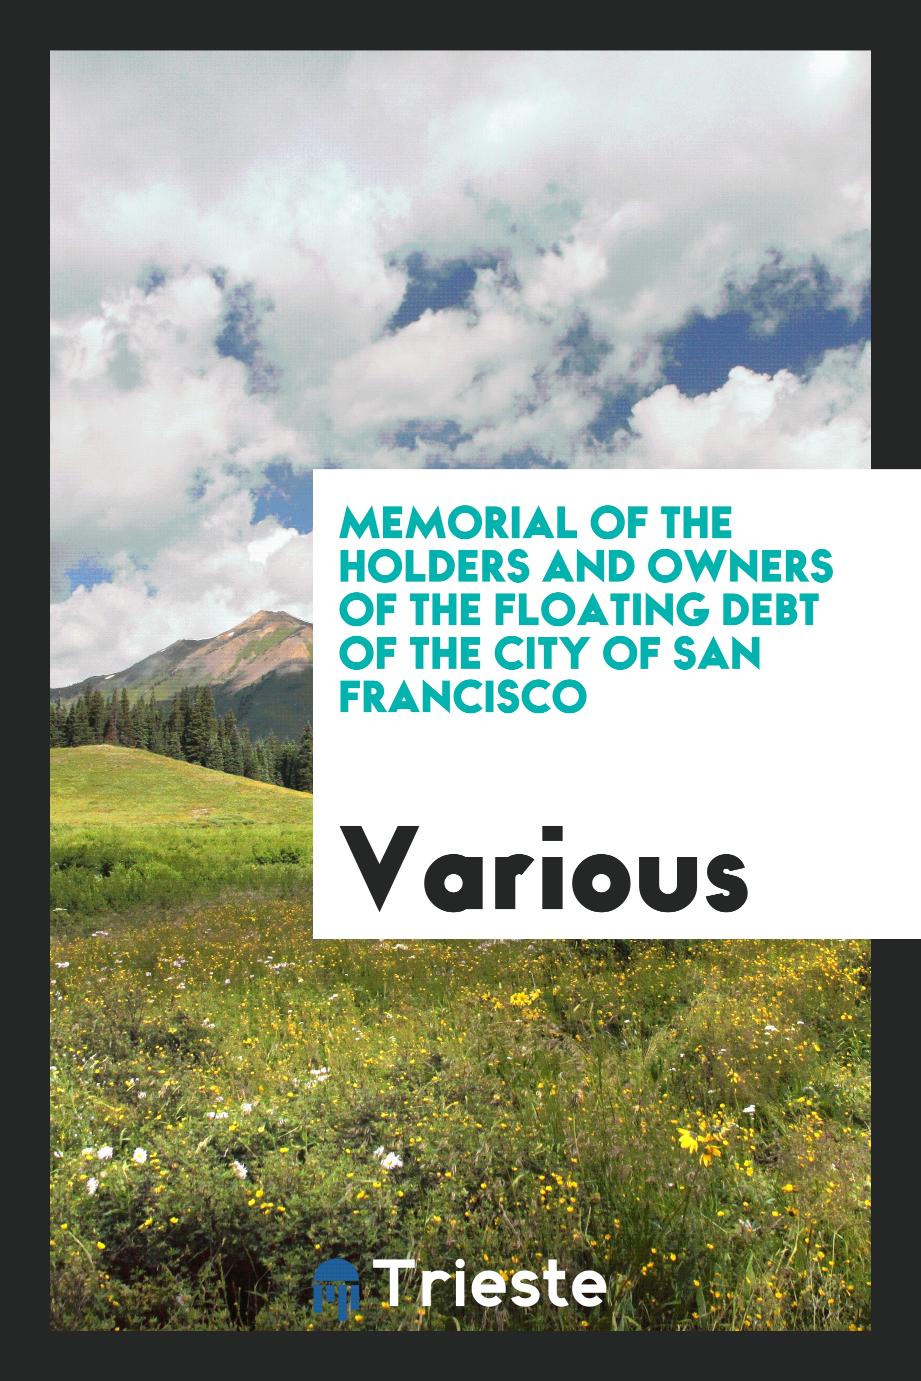 Memorial of the Holders and Owners of the Floating Debt of the City of San Francisco